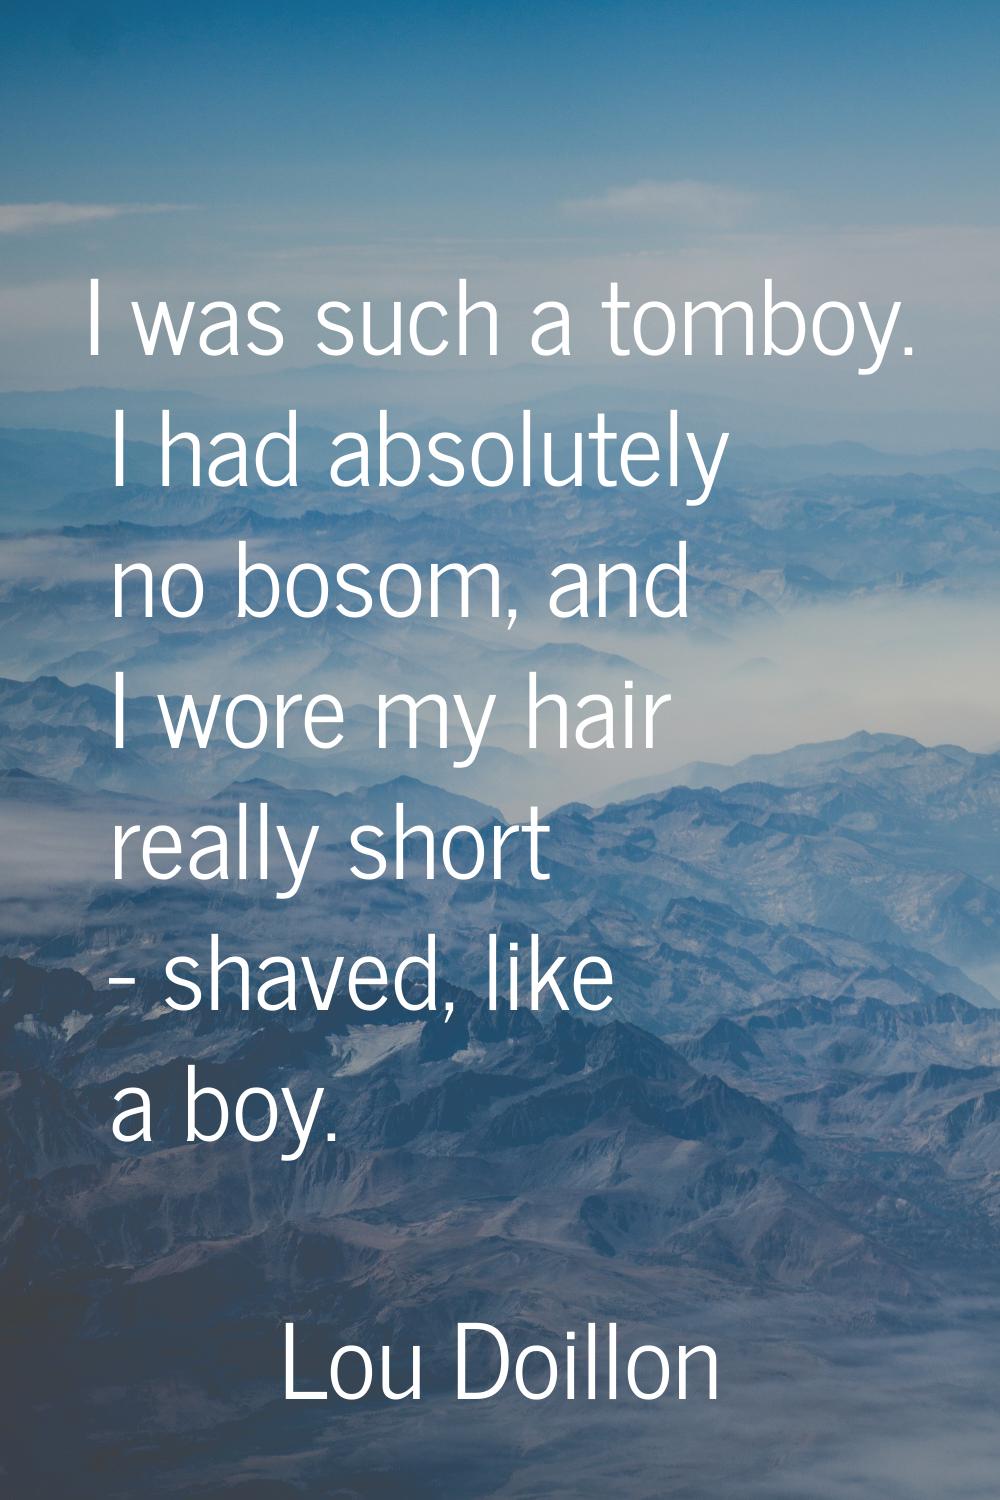 I was such a tomboy. I had absolutely no bosom, and I wore my hair really short - shaved, like a bo